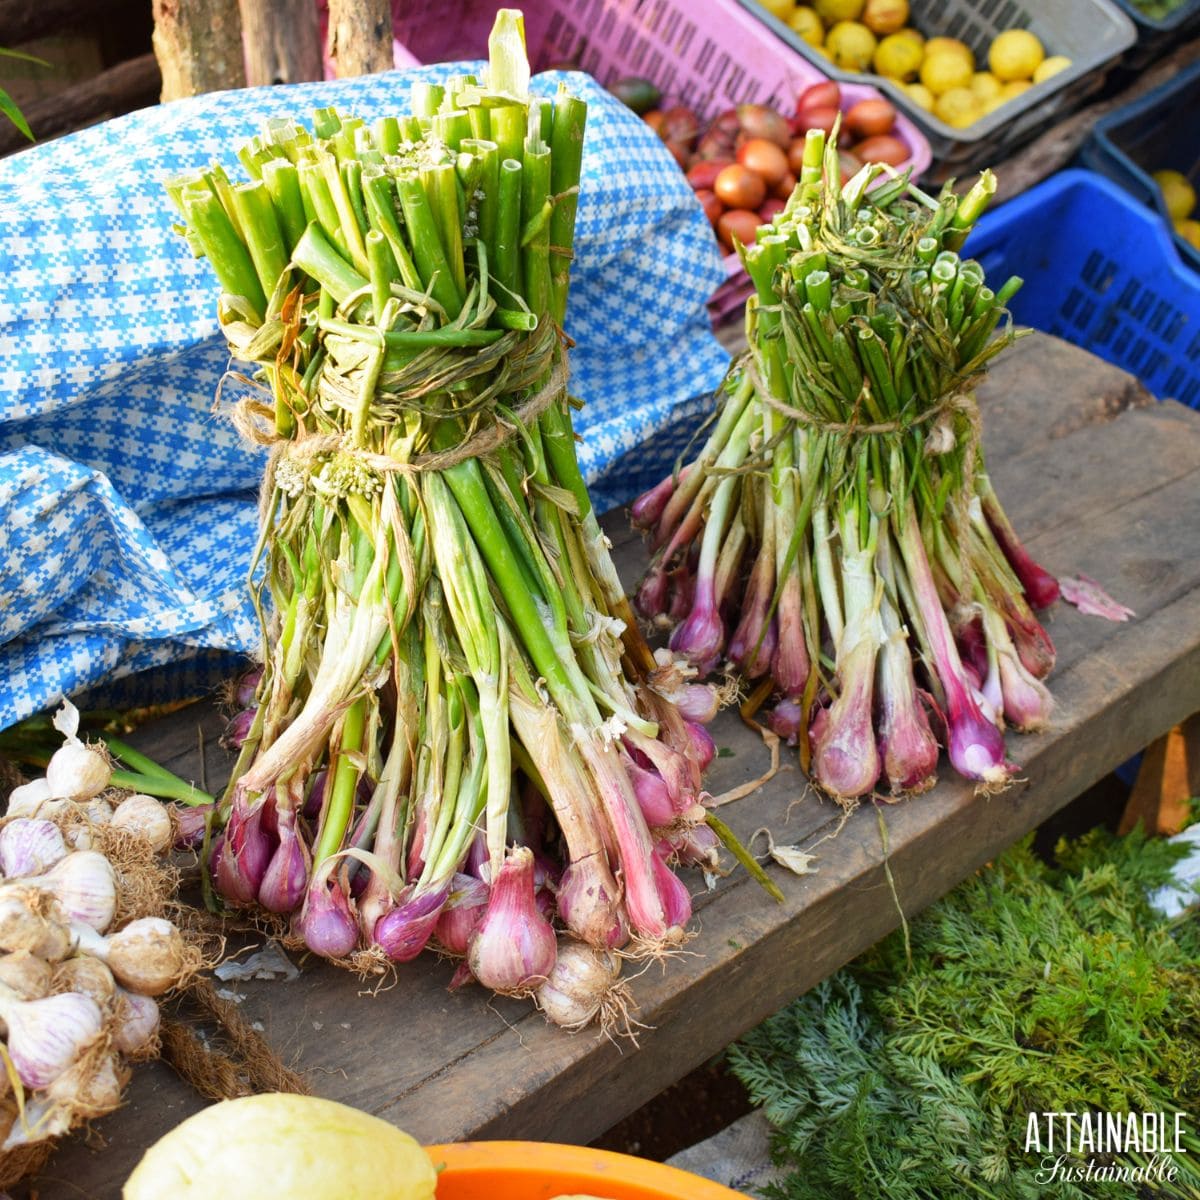 2 bunches of harvested shallots on a bench. 